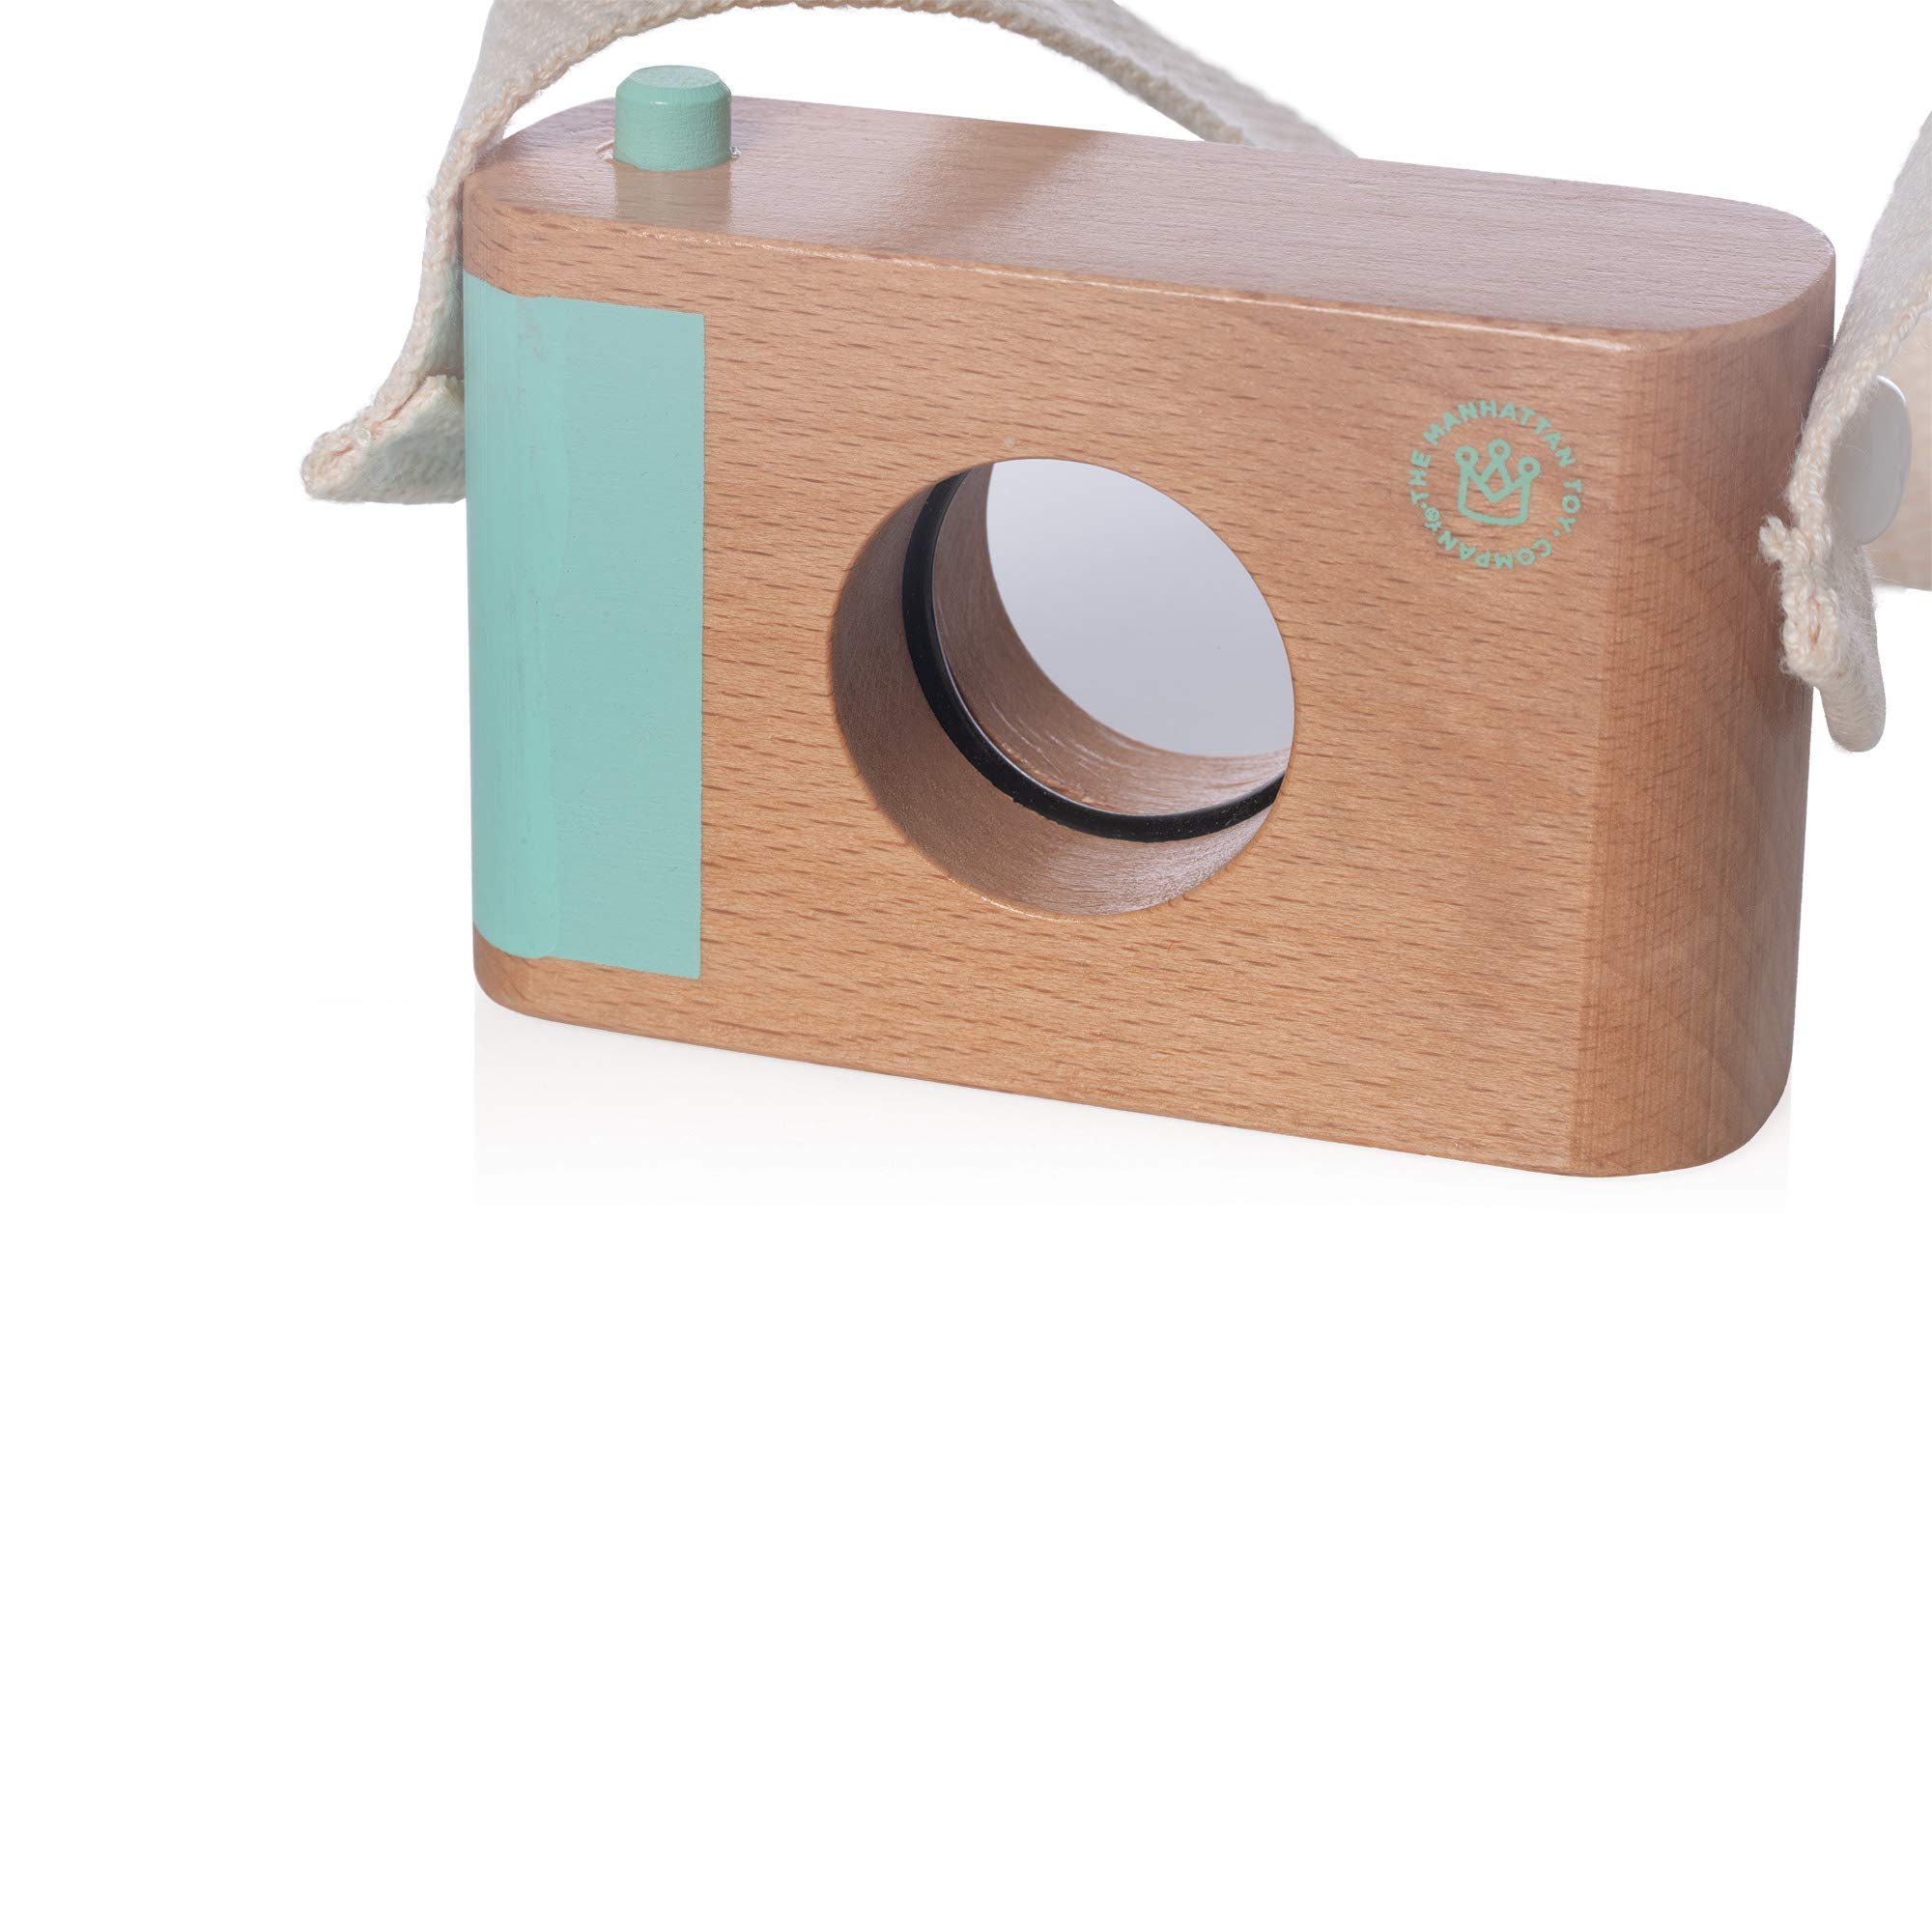 Manhattan Toy Natural Historian Wooden Camera Pretend Time Play with Clear, Green & Kaleidoscope Lenses